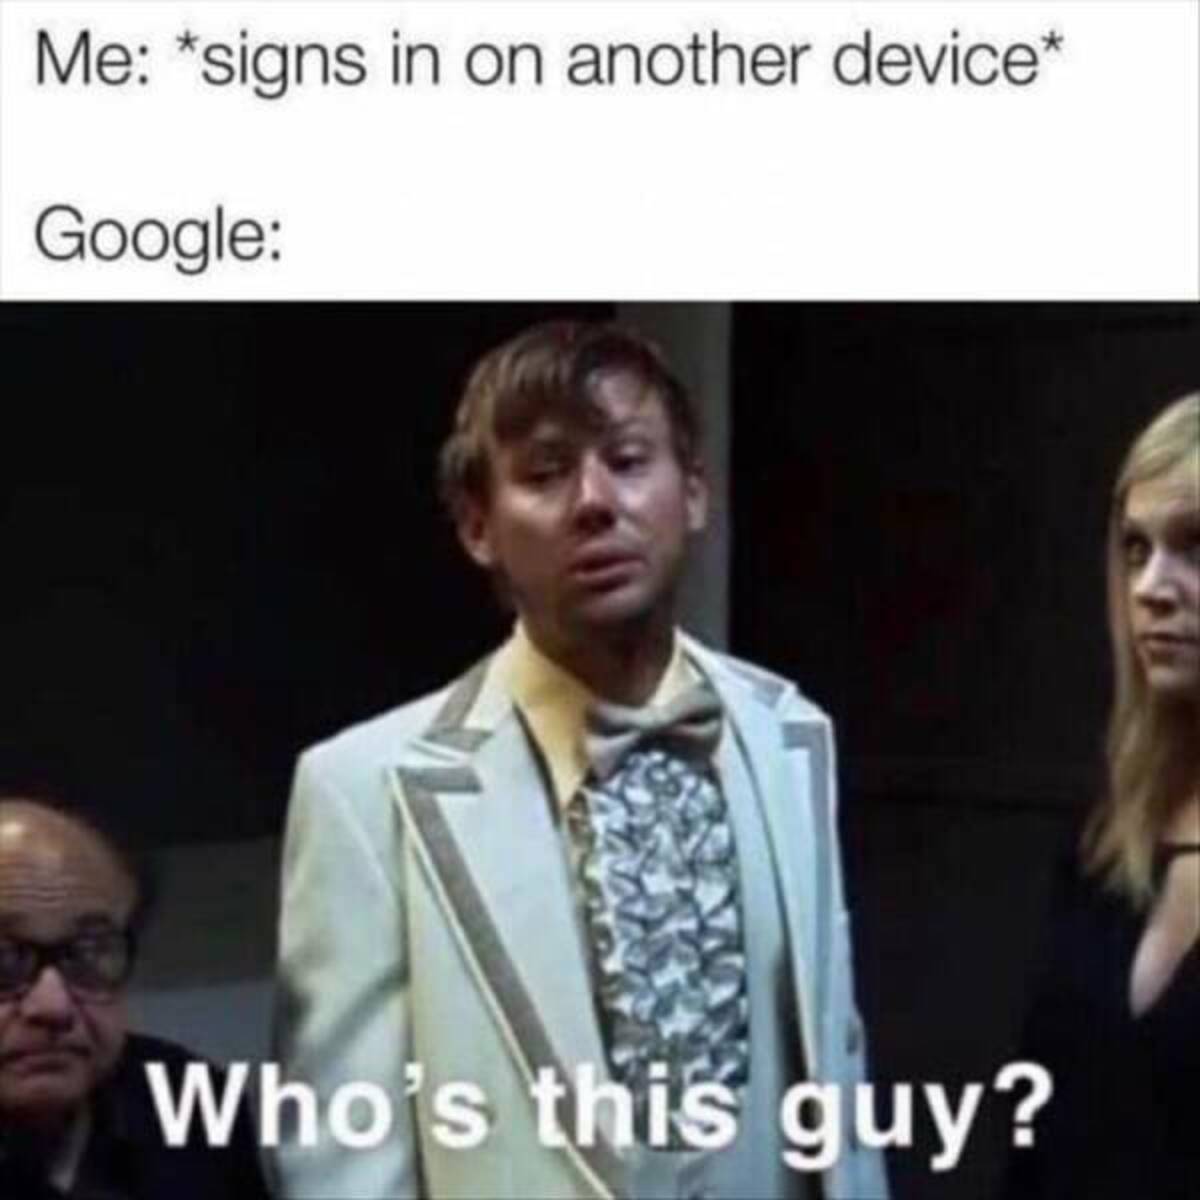 iasip who's this guy - Me signs in on another device Google Who's this guy?